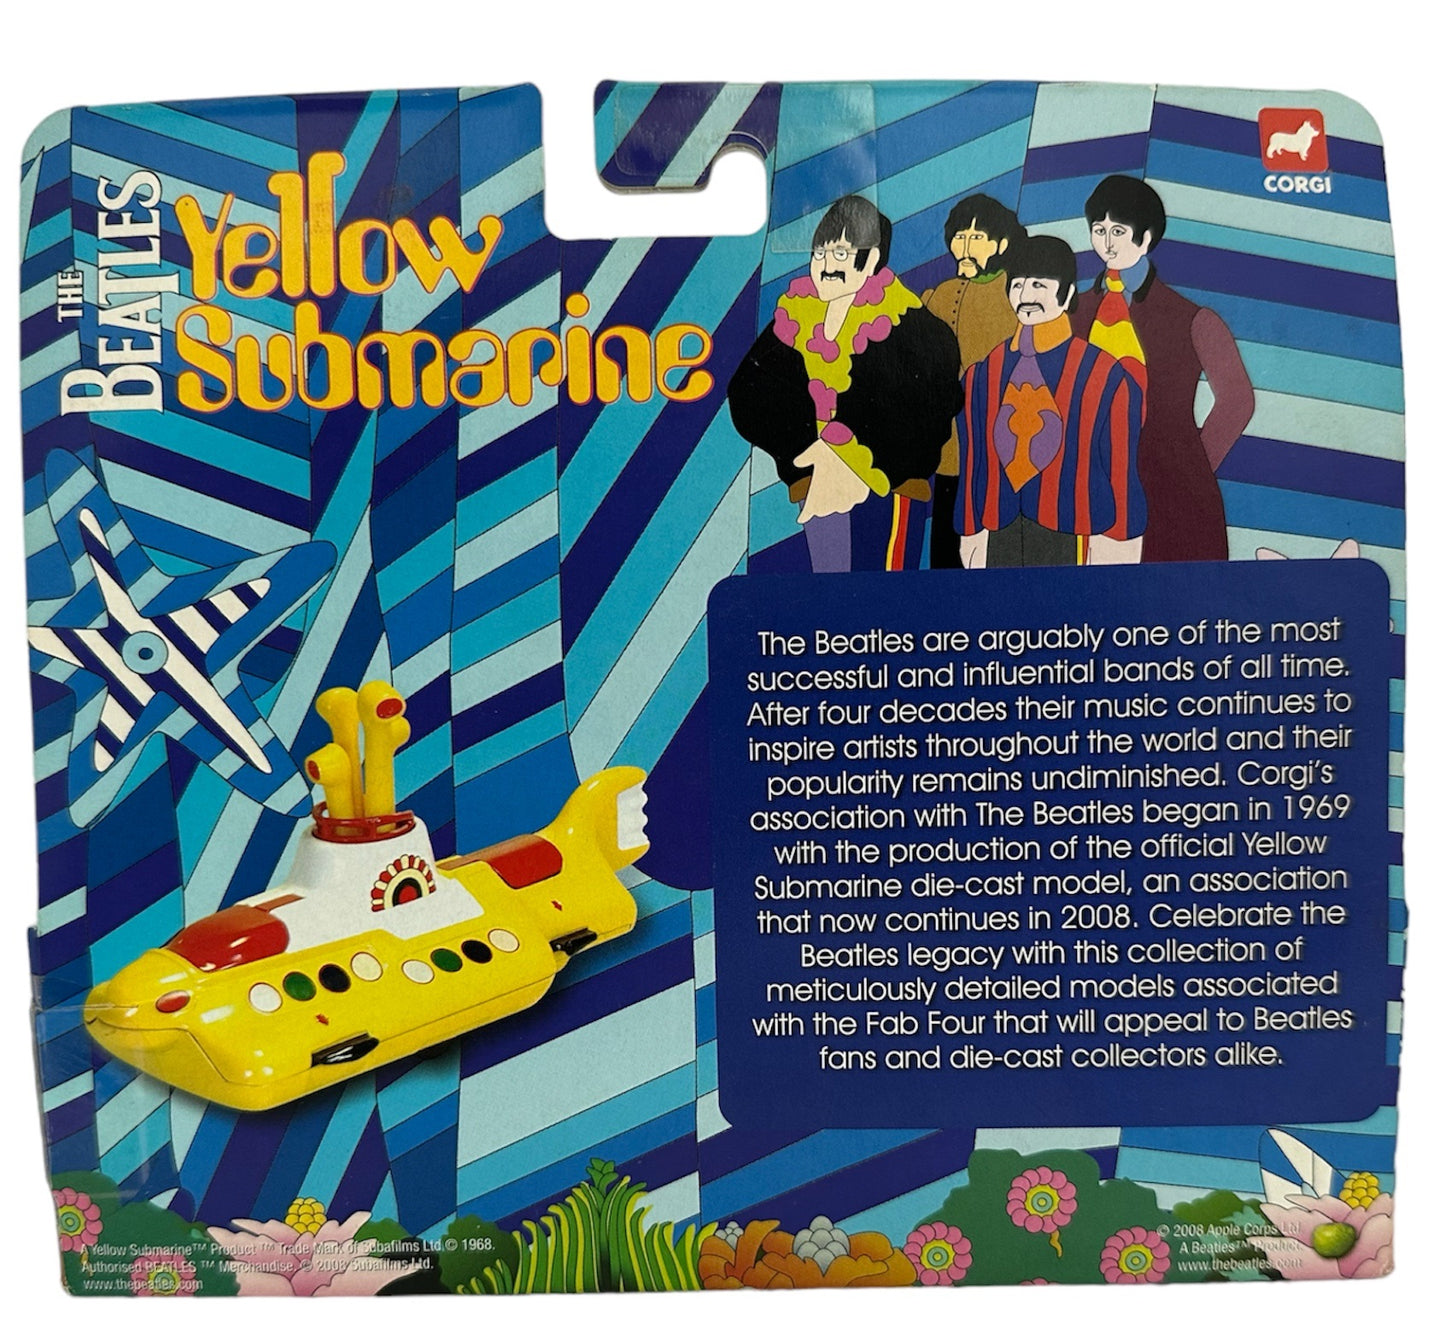 Vintage 2008 Corgi Classics The Beatles Yellow Submarine A Detailed Die-cast Replica Model For The Adult Collector - Brand New Factory Sealed Shop Stock Room Find.